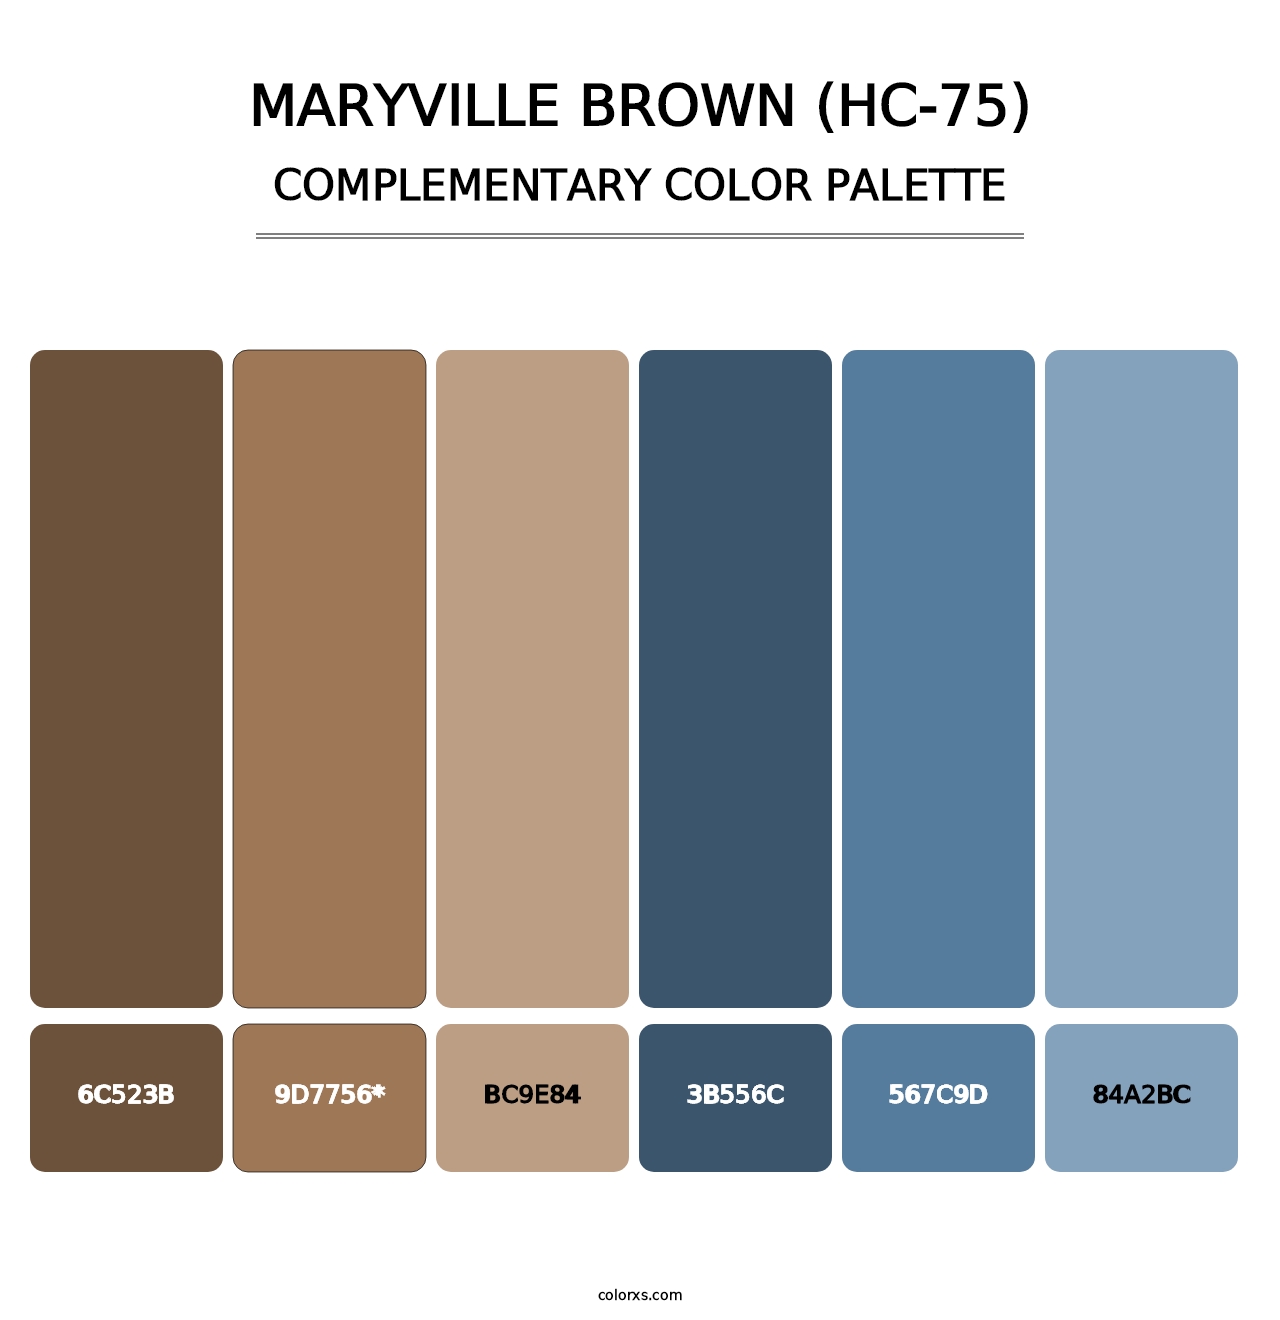 Maryville Brown (HC-75) - Complementary Color Palette